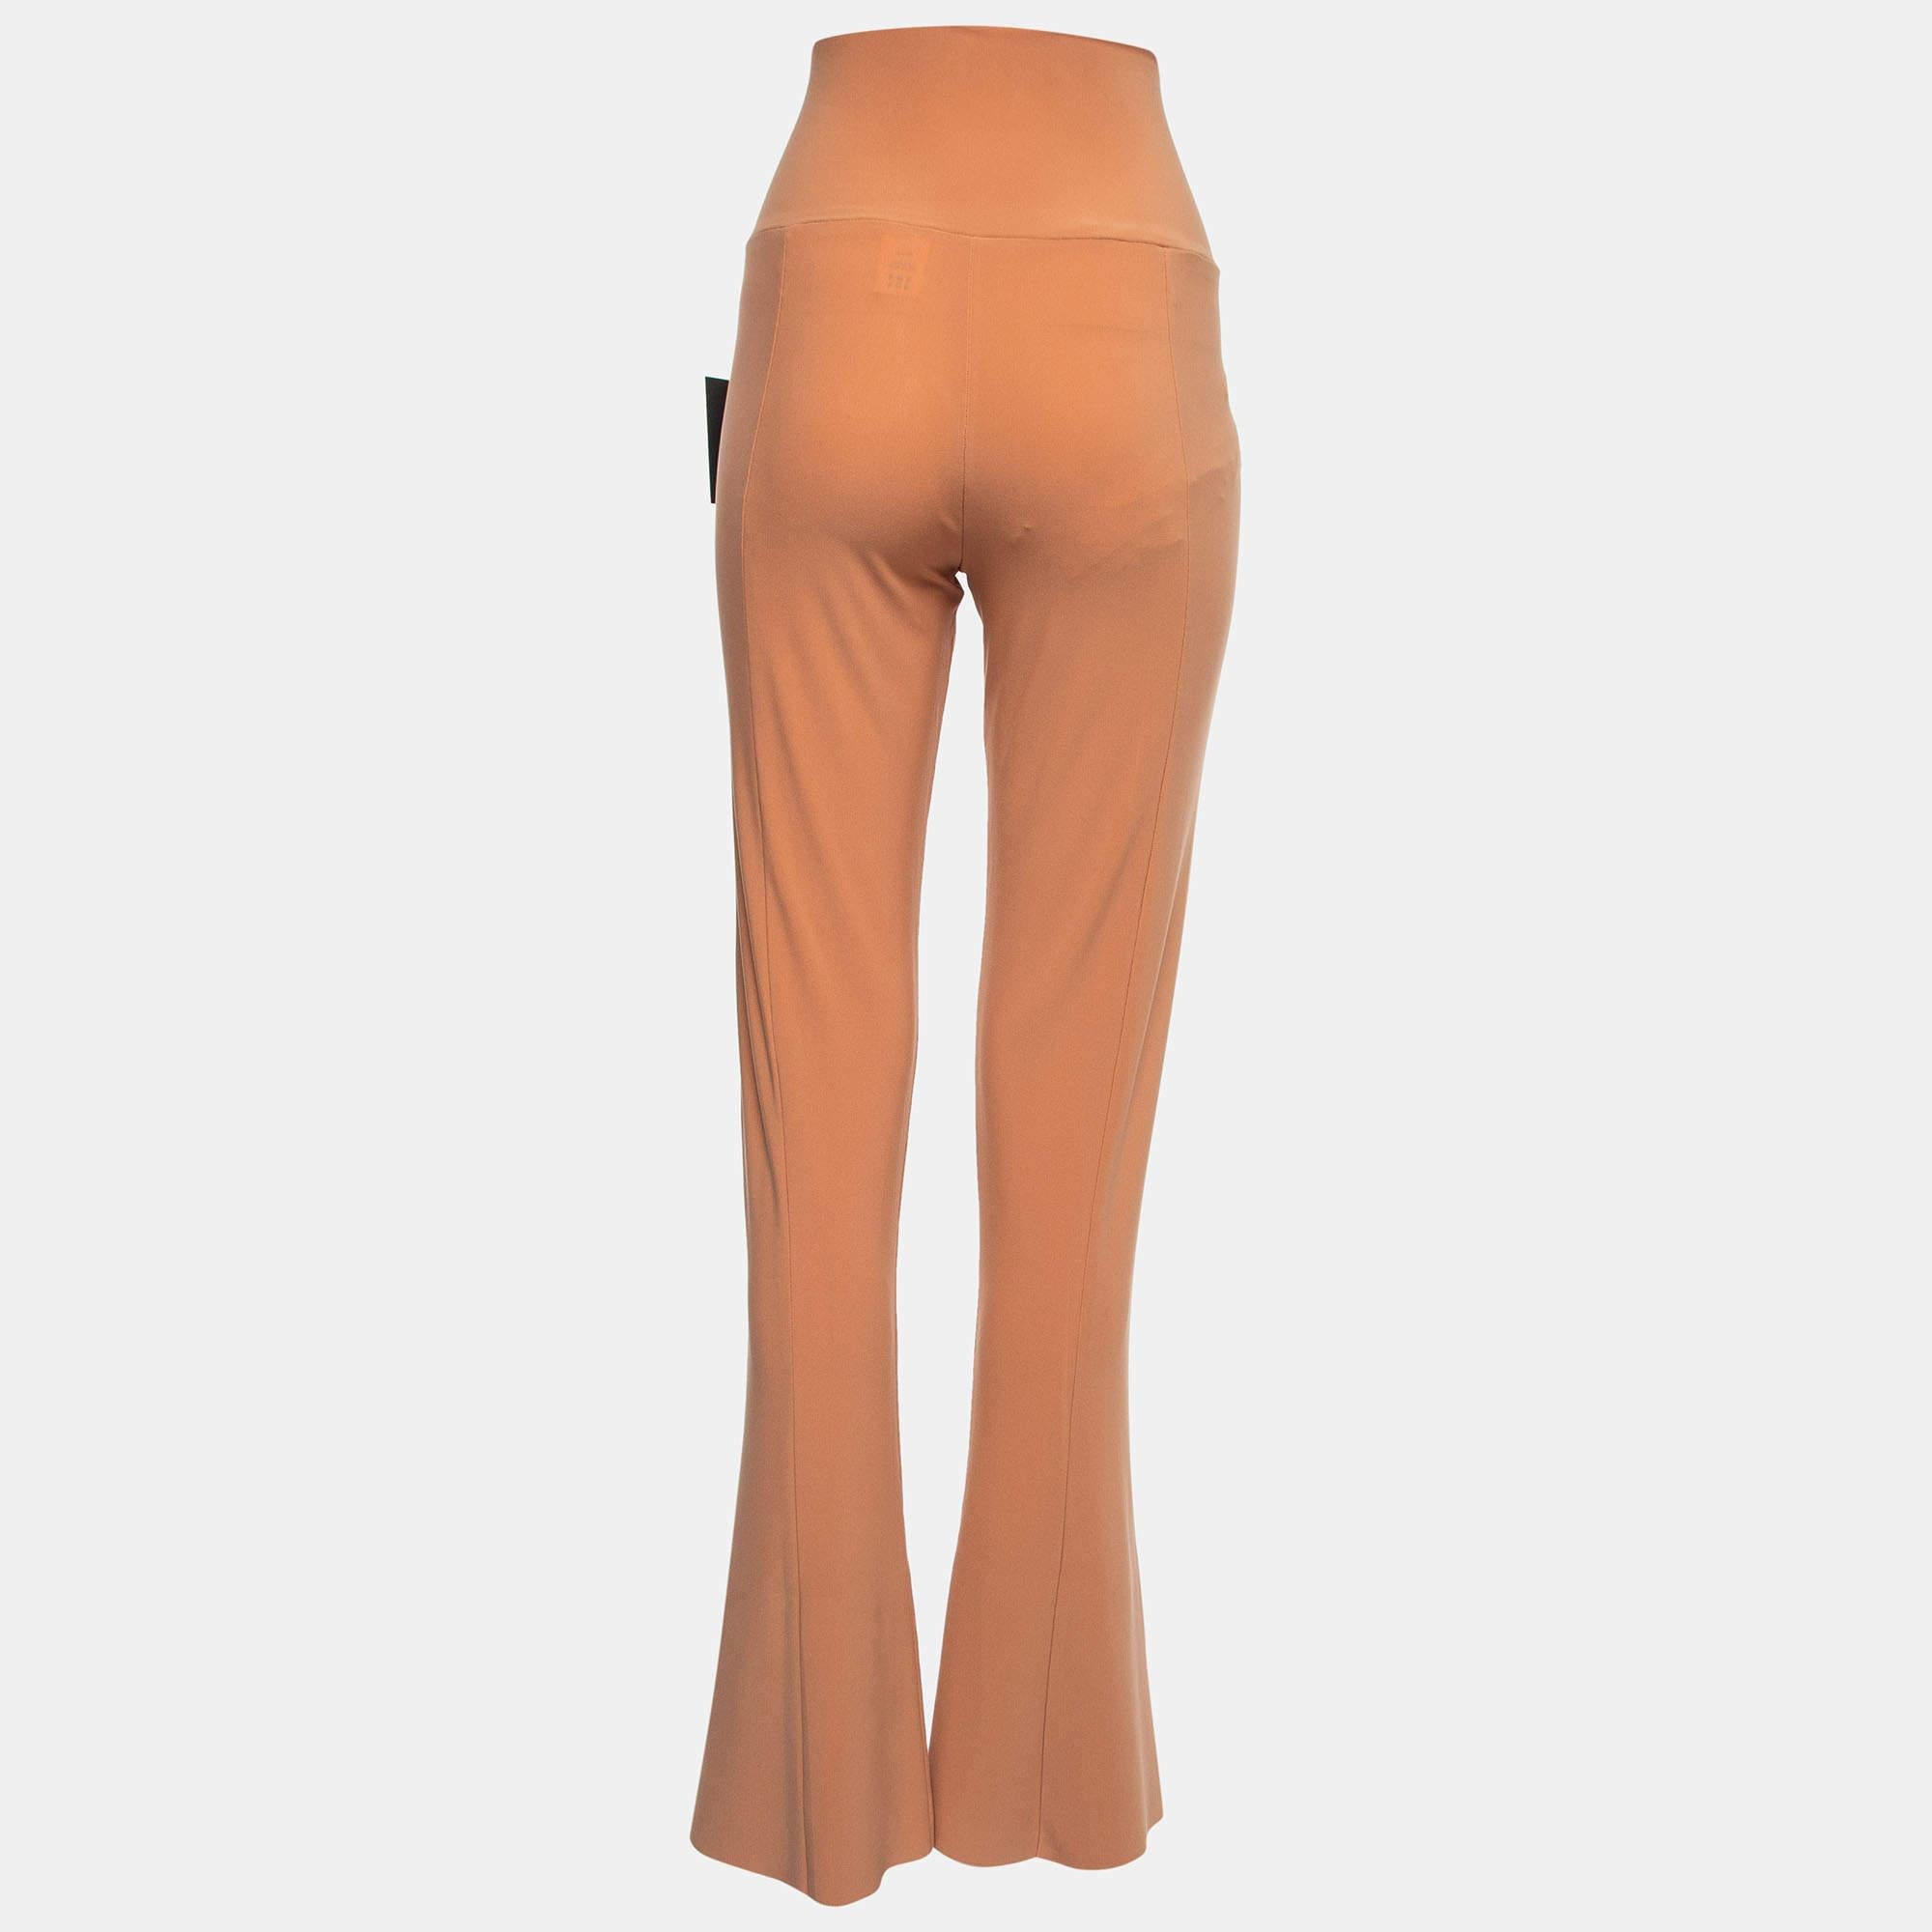 The Norma Kamali leggings are a stylish blend of comfort and fashion. Crafted from stretchy knit fabric, featuring a high waist for a flattering fit, and adorned with an orange color, these leggings are a great pick.

Includes: Brand Tag